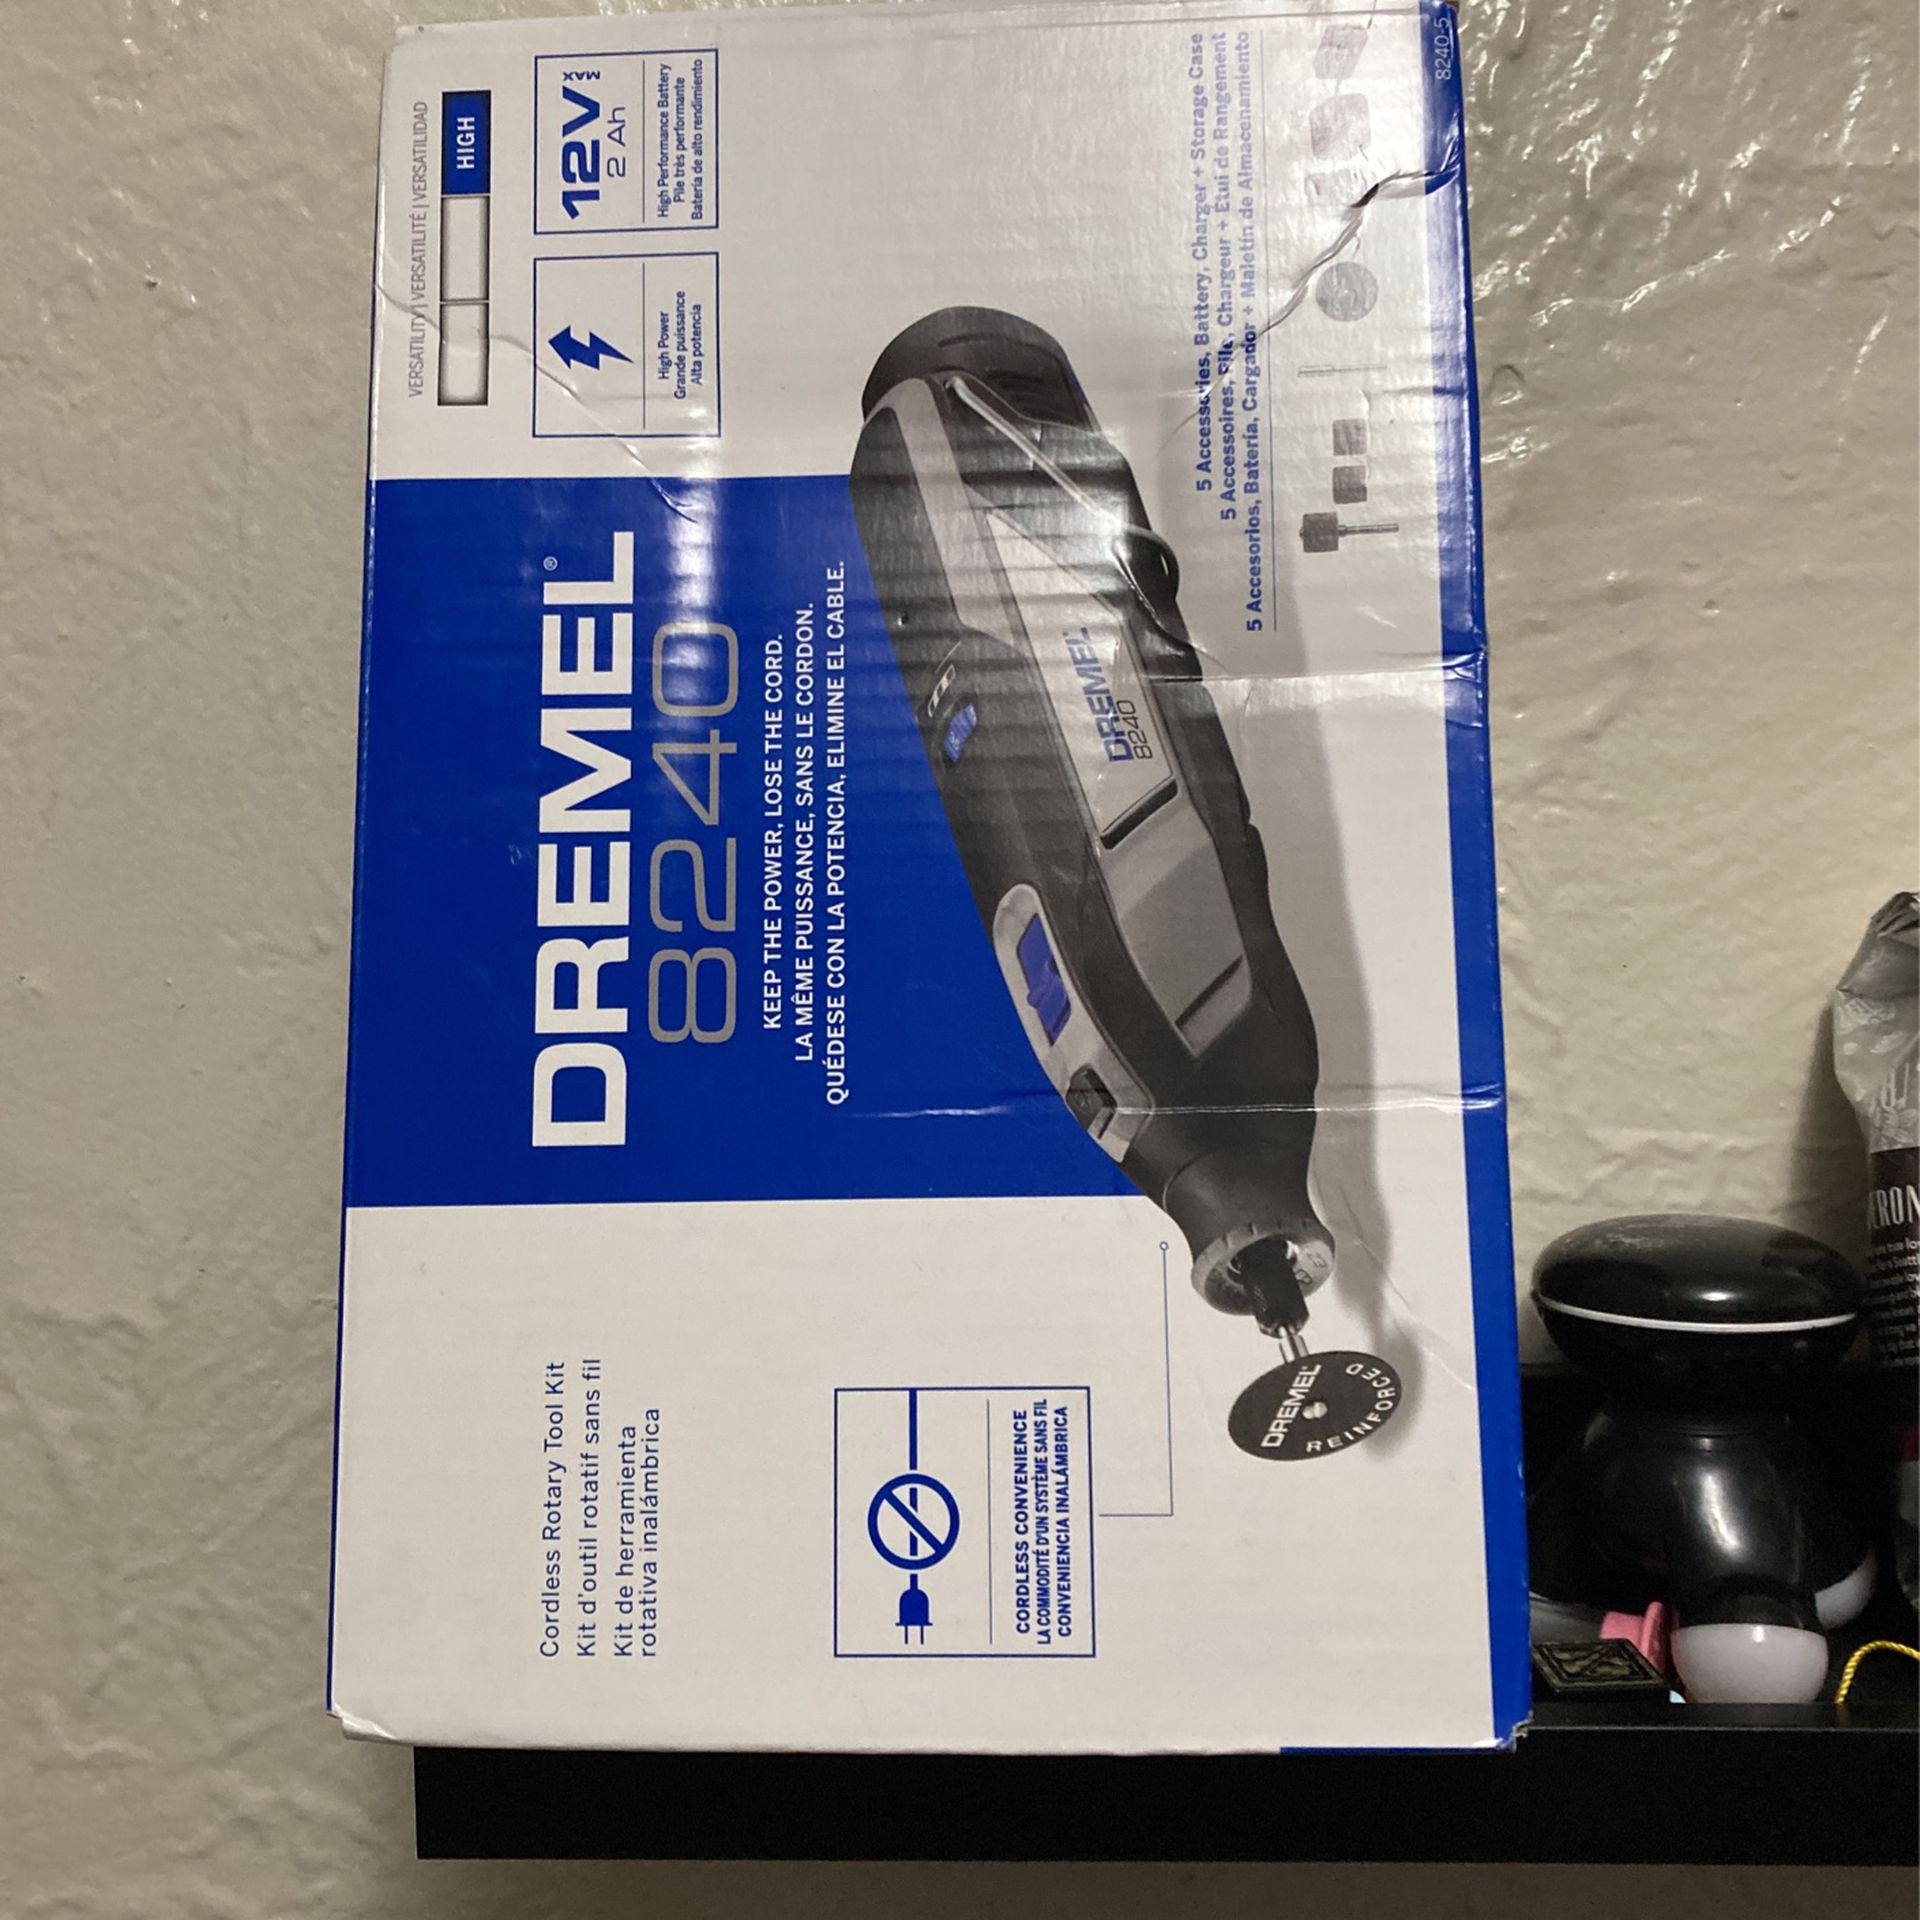 Dremel 8240 LI Ion Rechargeable With Fitted Case And Accessories Brand New In Box